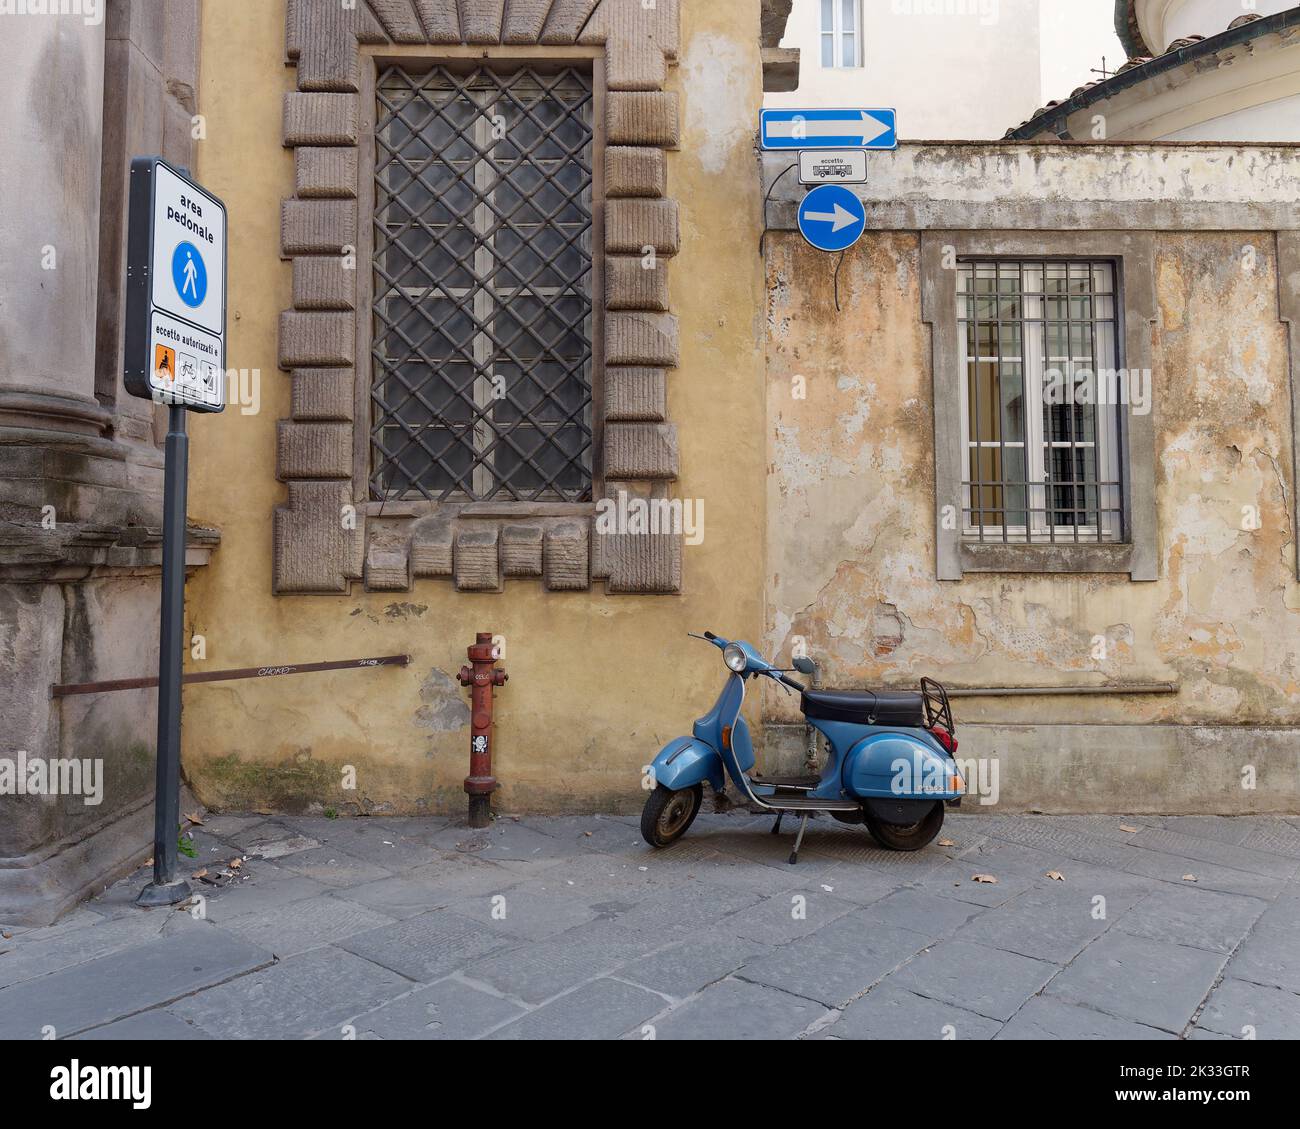 Blue Vespa and a yellow building wiith large windows on a one way street in the town of Lucca, Tuscany, Italy Stock Photo